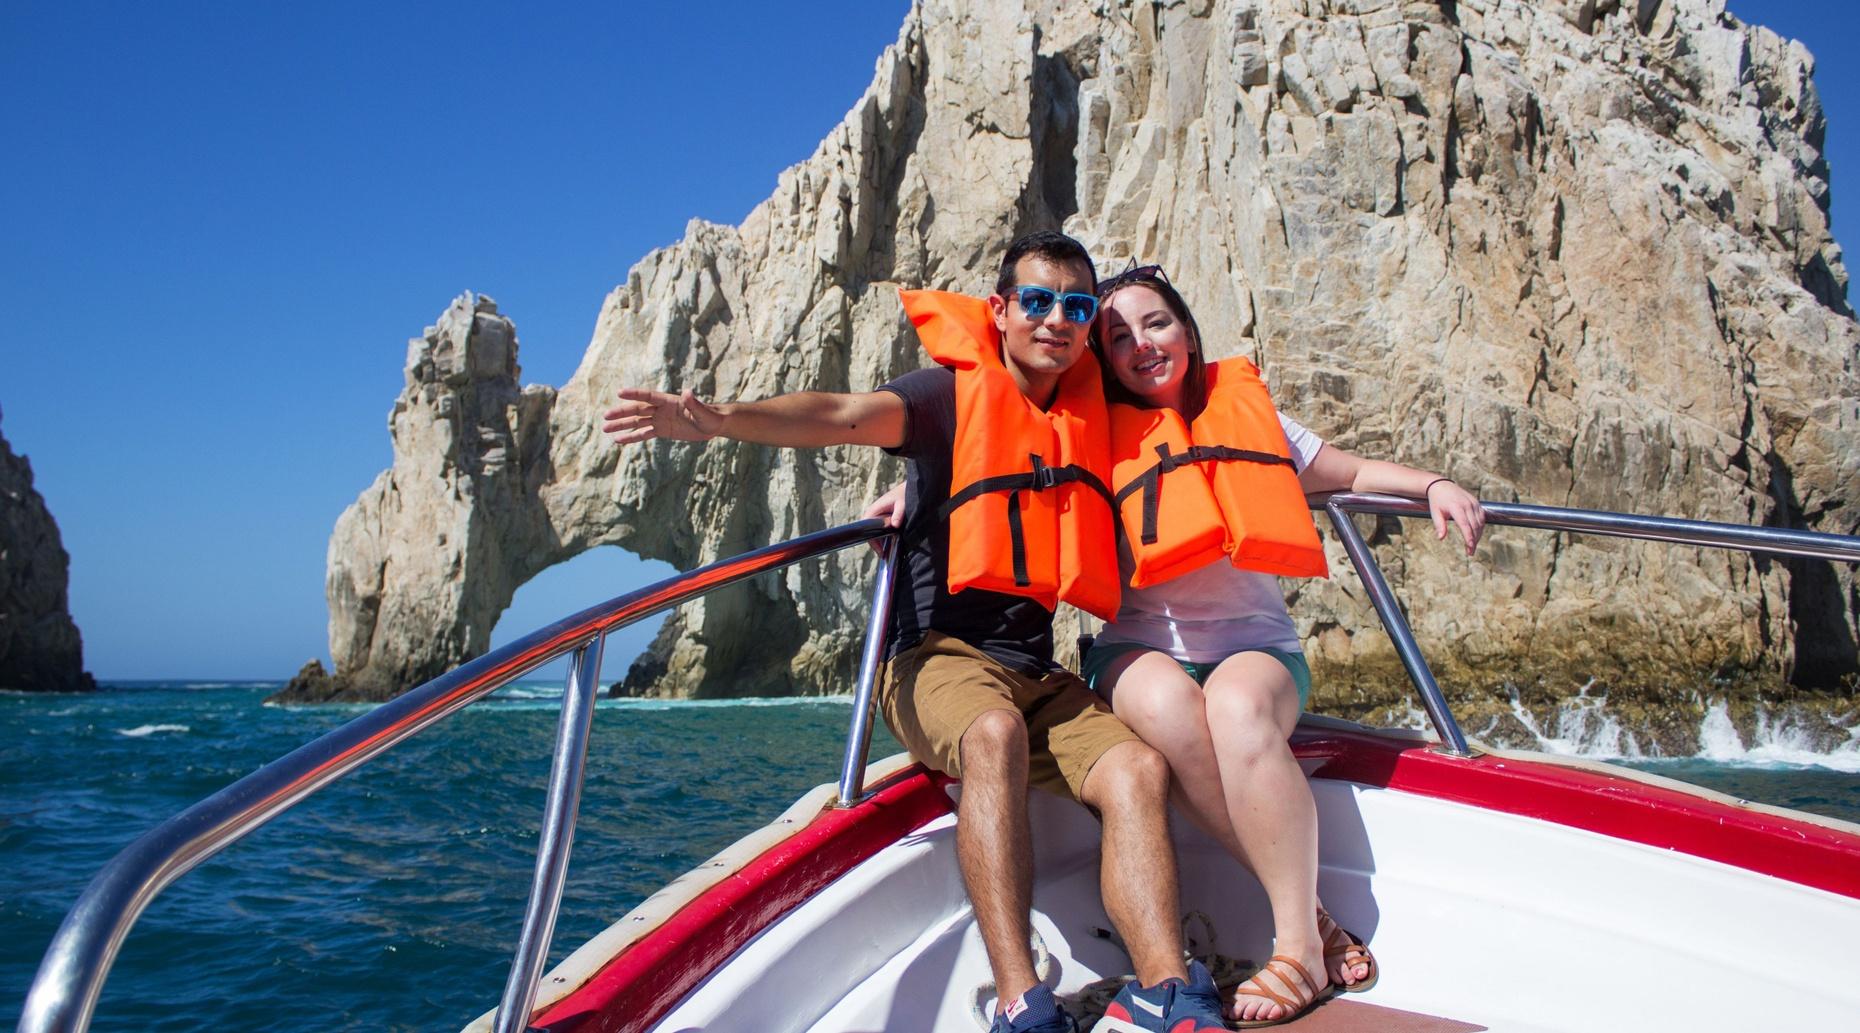 Bucket List Tour of Cabo